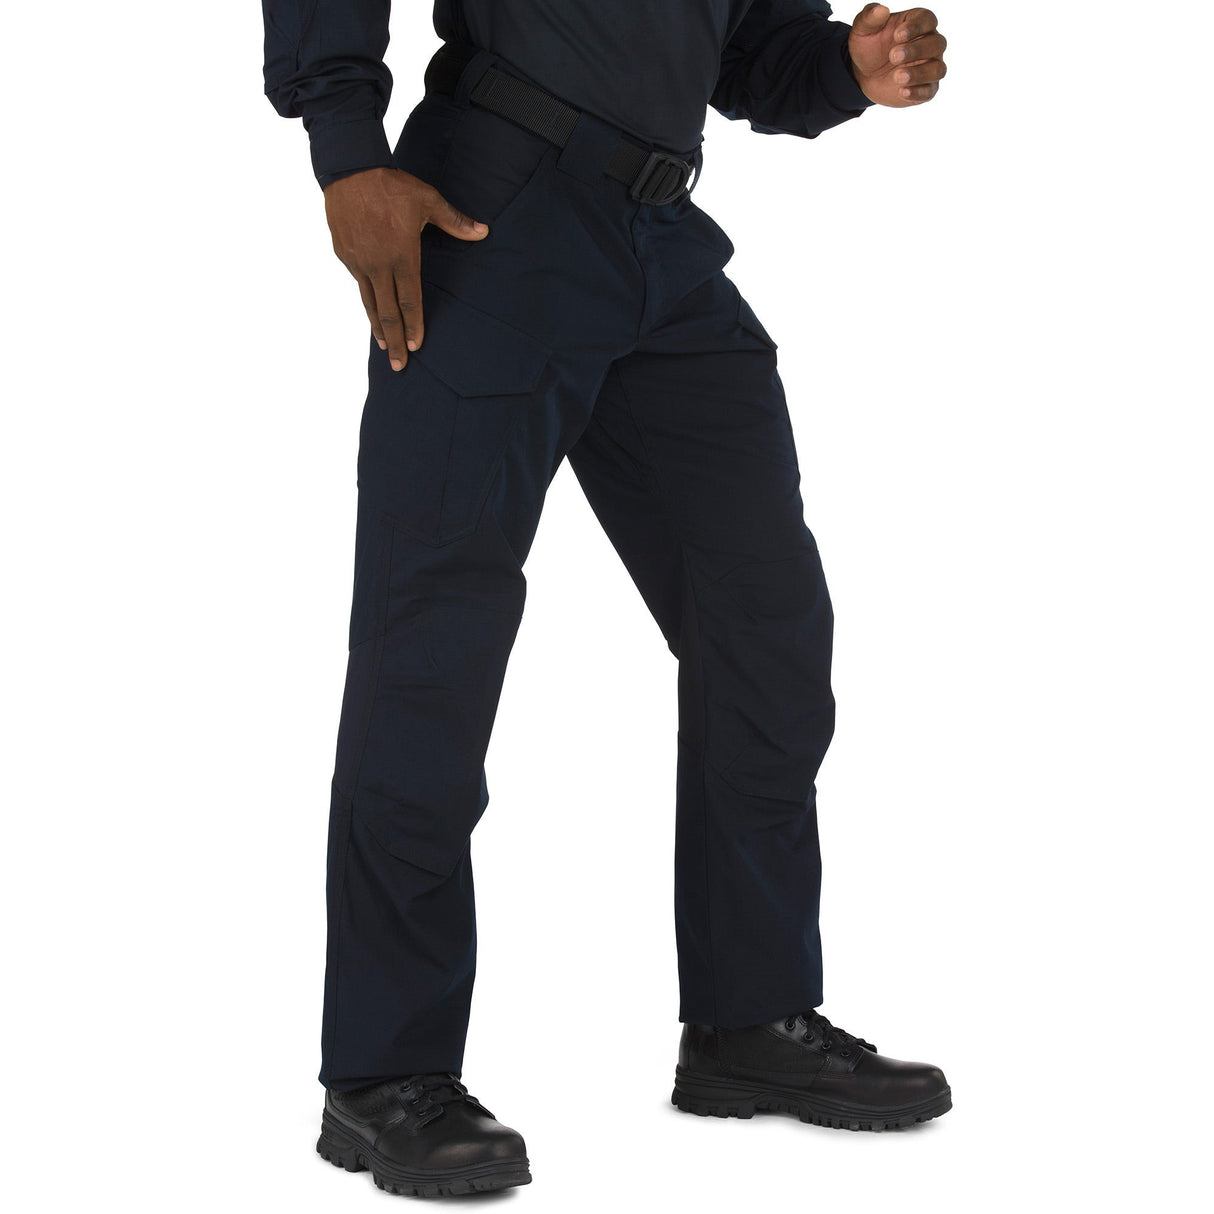 Functional Duty Wear Pant: Designed for optimal performance and functionality.